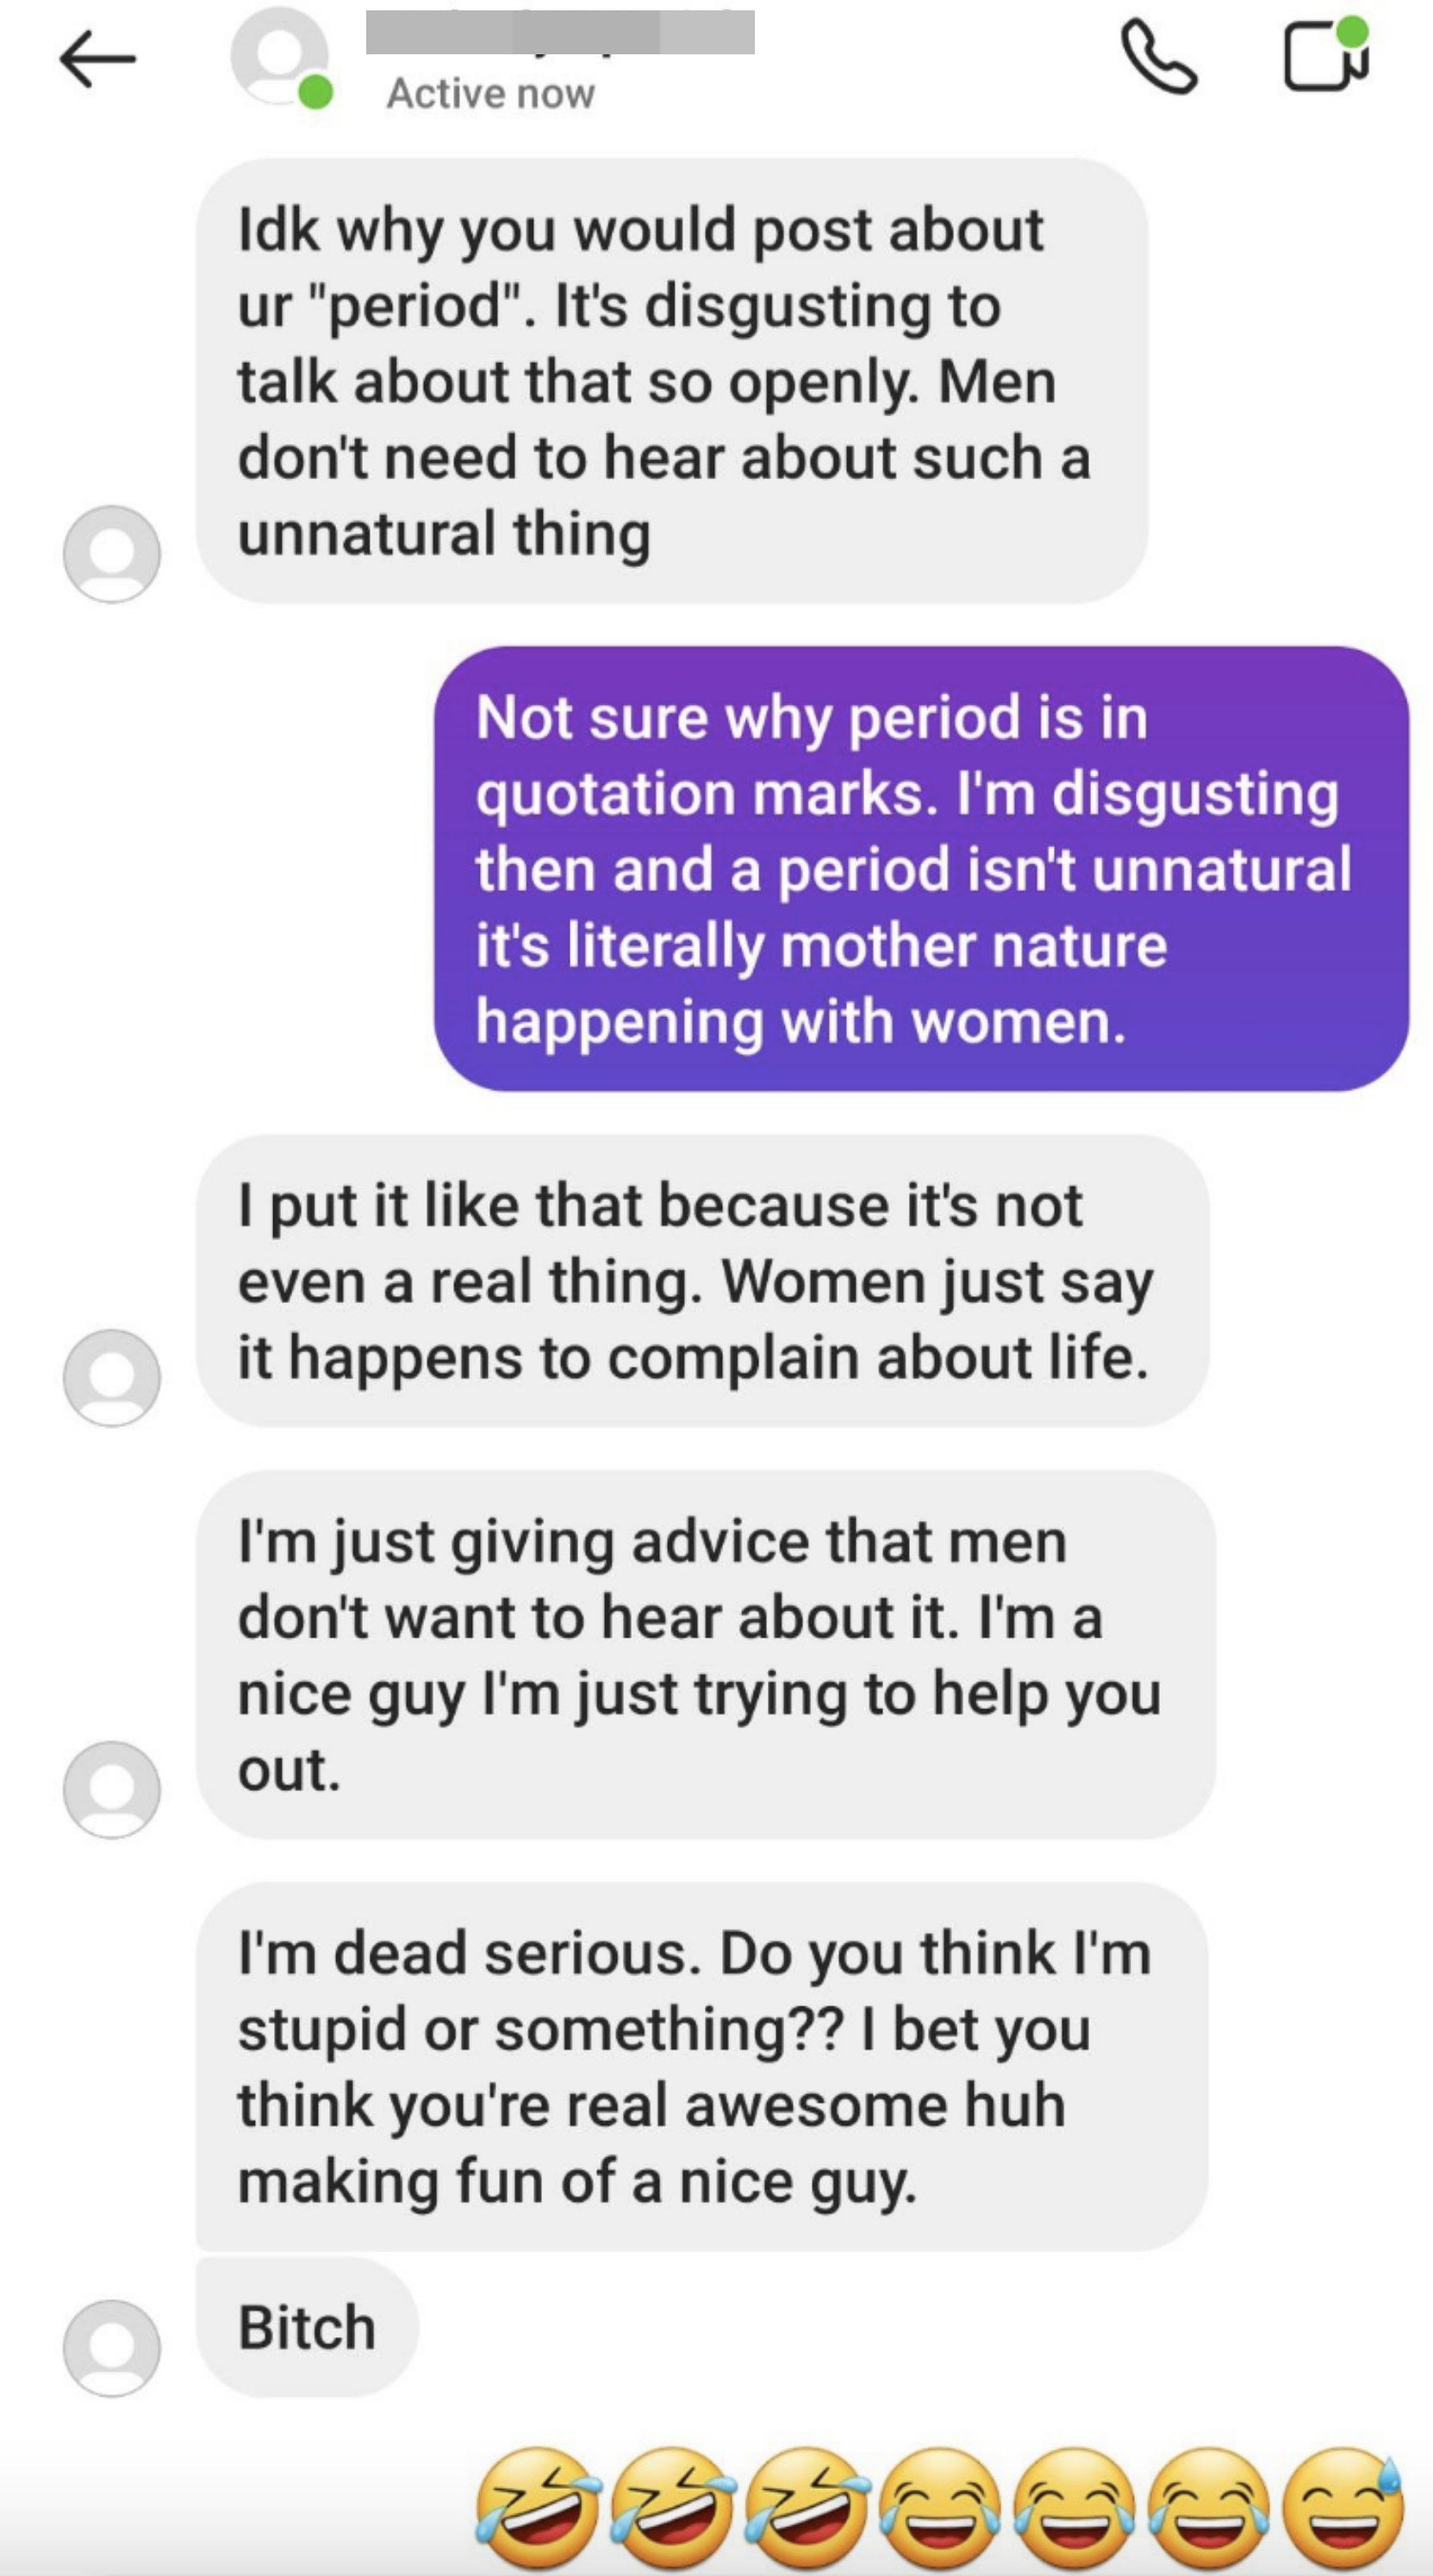 A man tells a woman she shouldn&#x27;t post about her period and calls it unnatural, then says it&#x27;s not even a real thing, just something women make up to complain